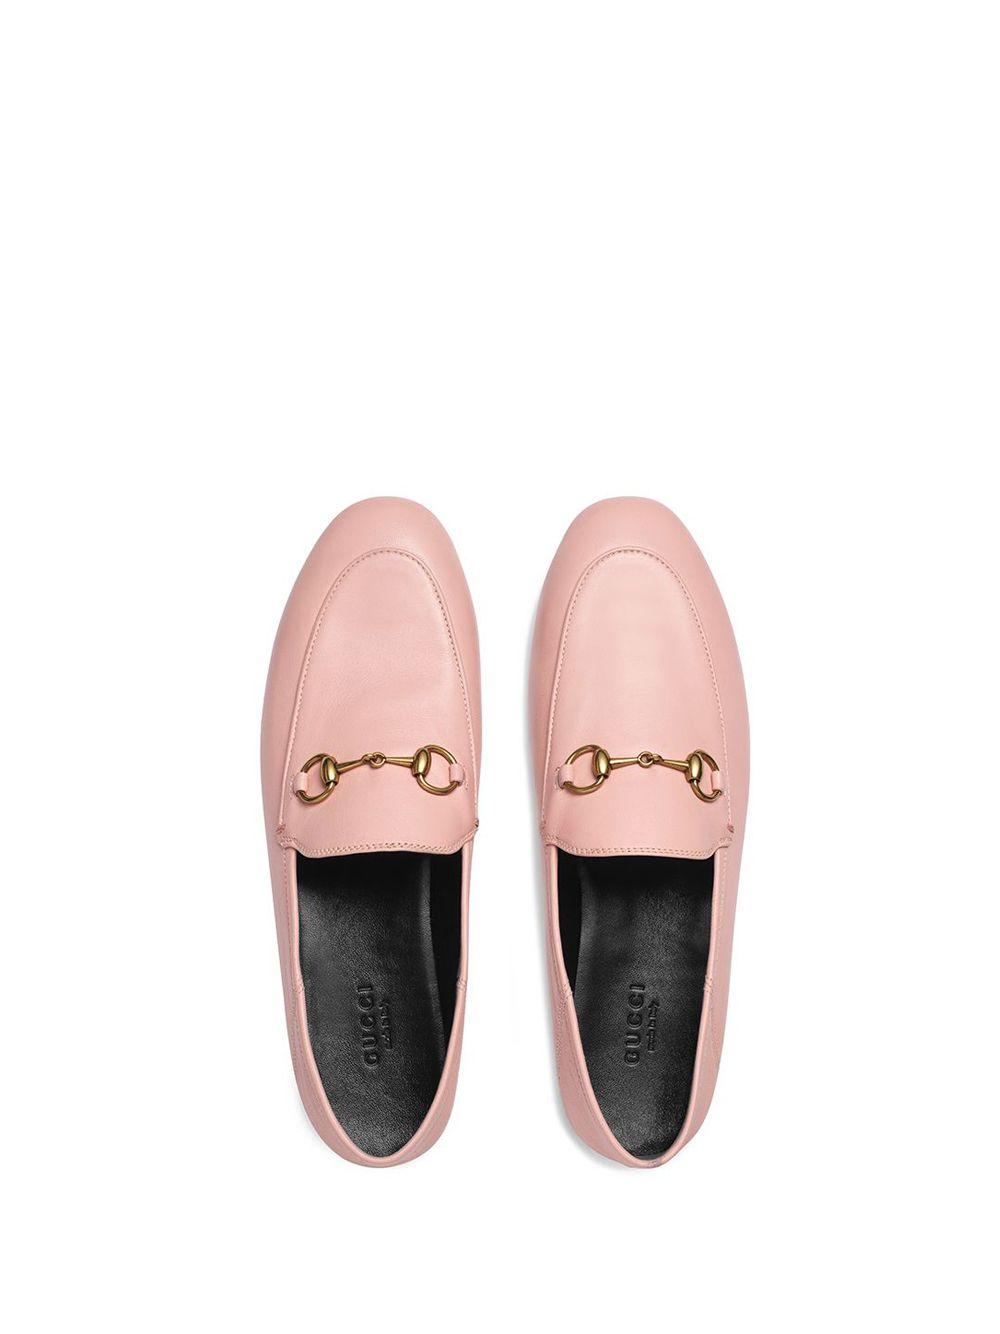 gucci pink loafer